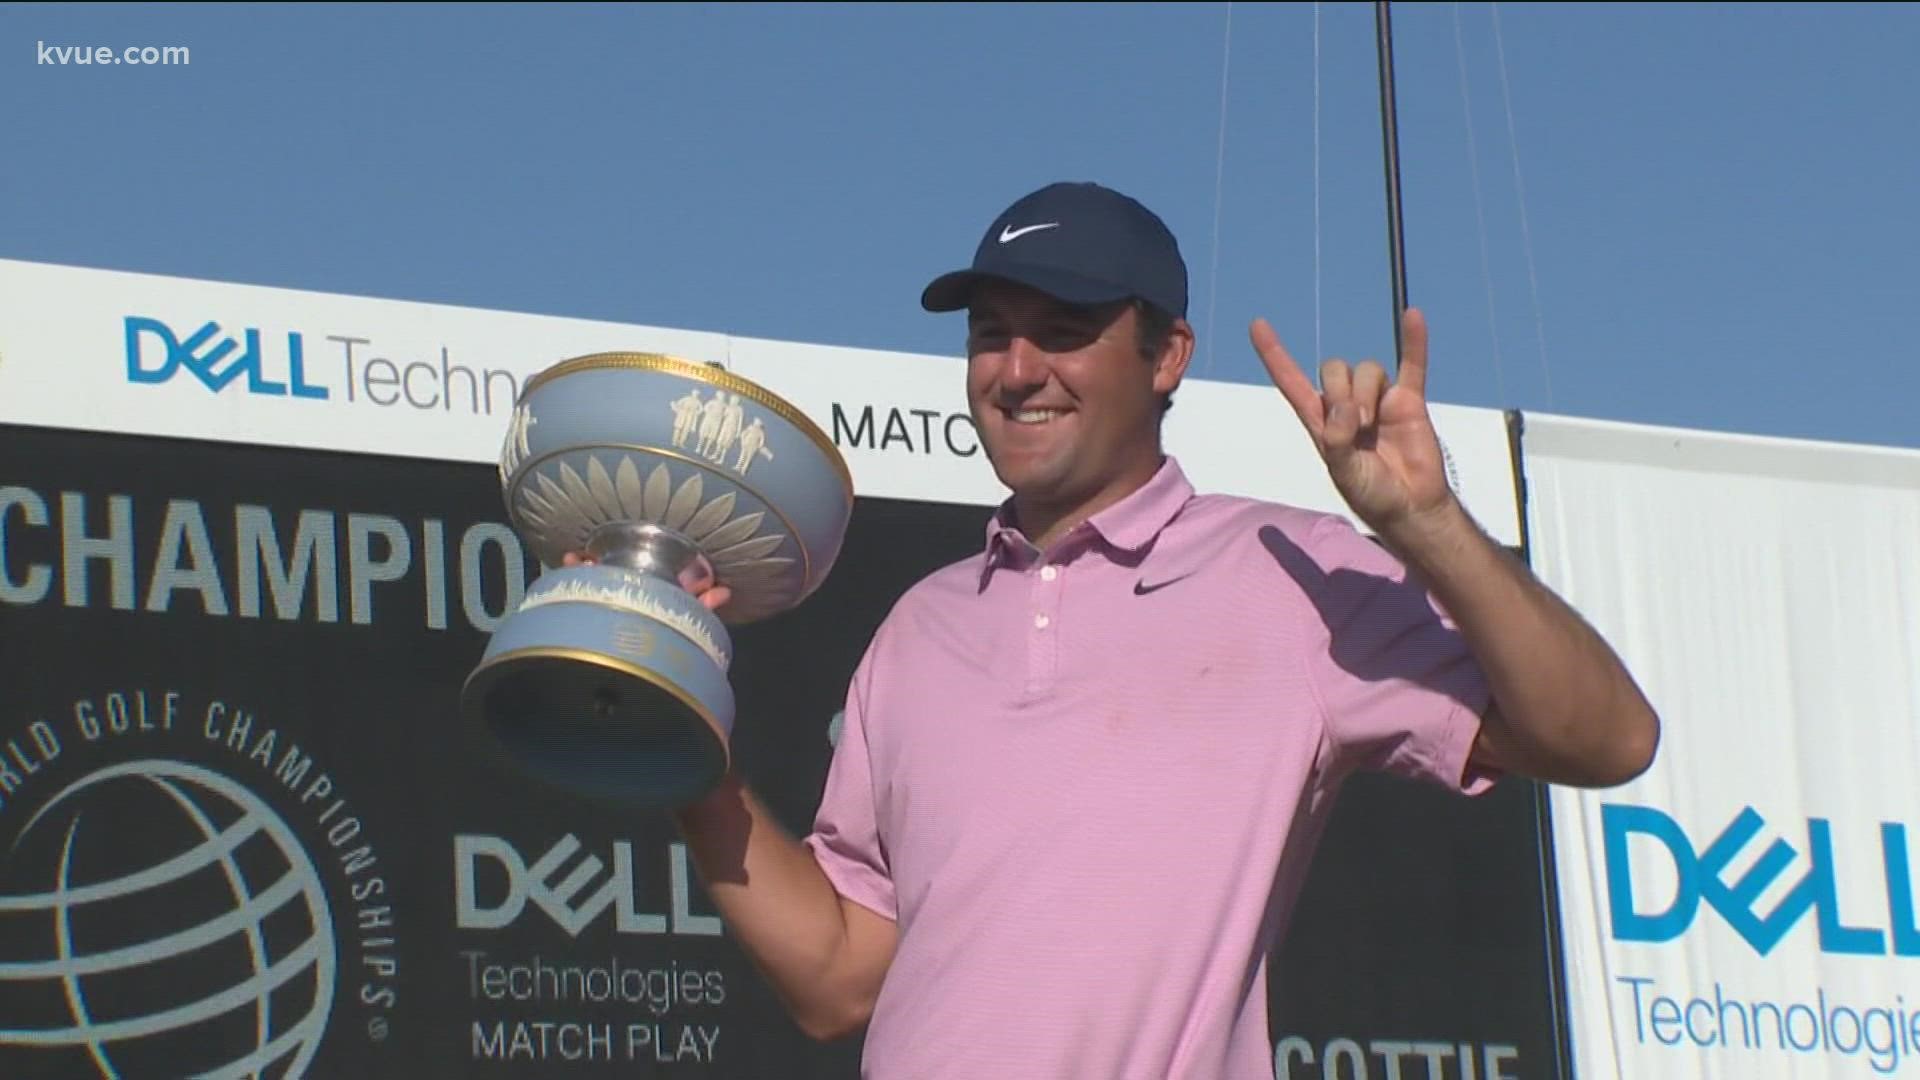 Six weeks after his first PGA Tour victory, Scheffler won the Dell Technologies Match Play, moving him to No. 1 in world.